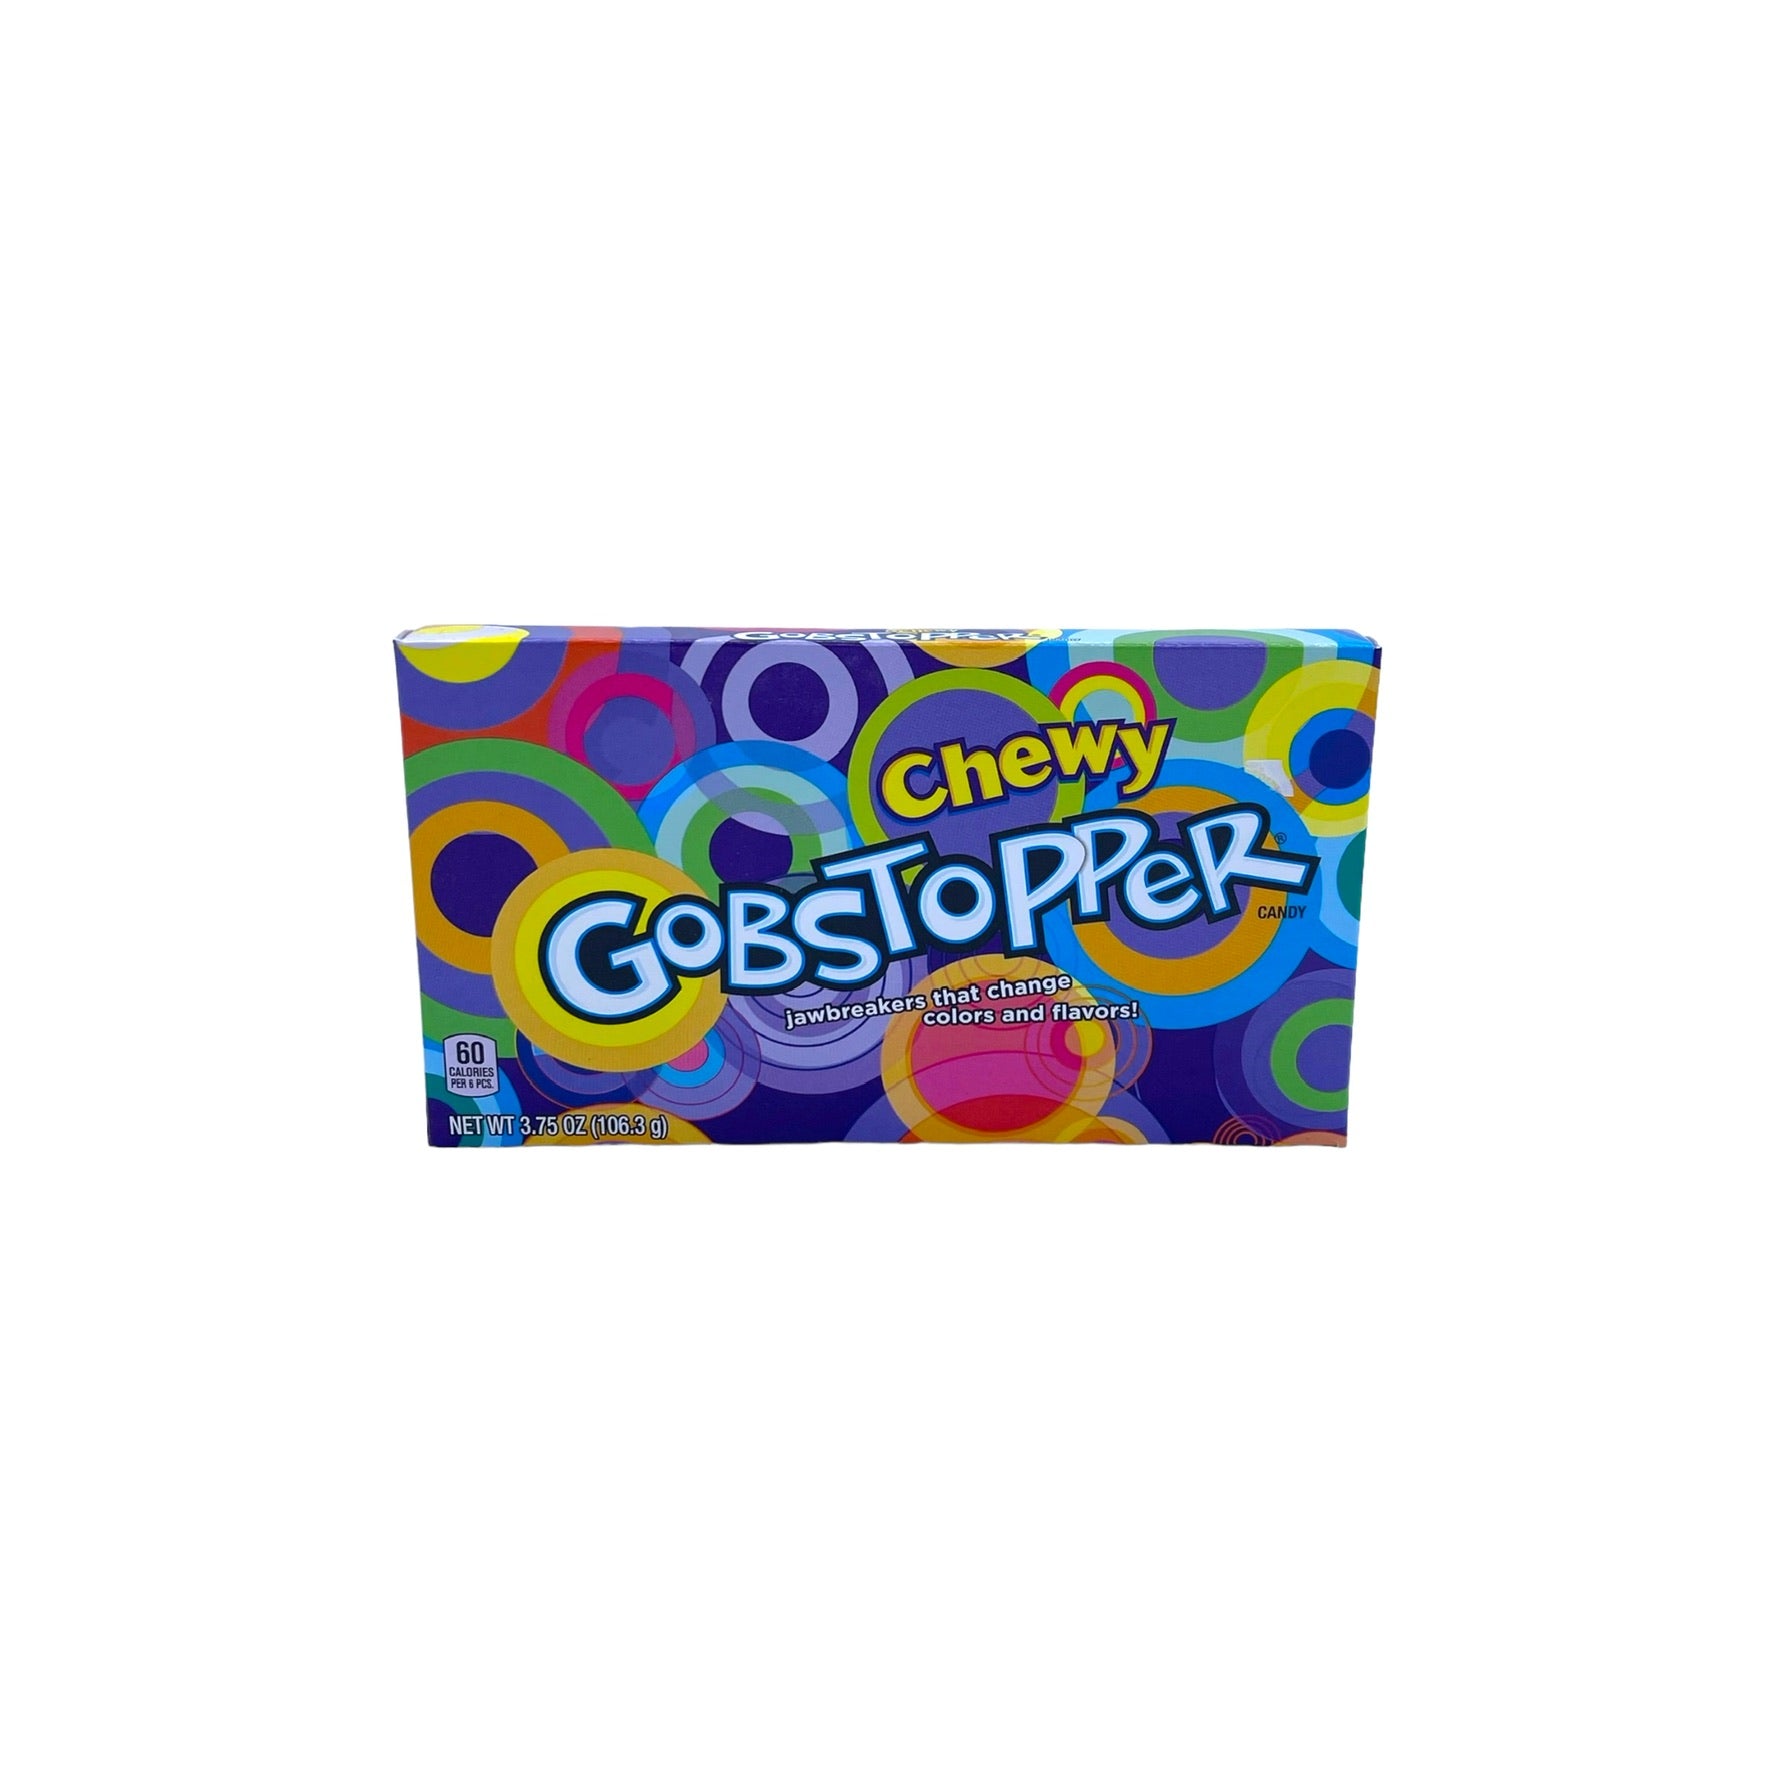 Everlasting Gobstopper Chewy